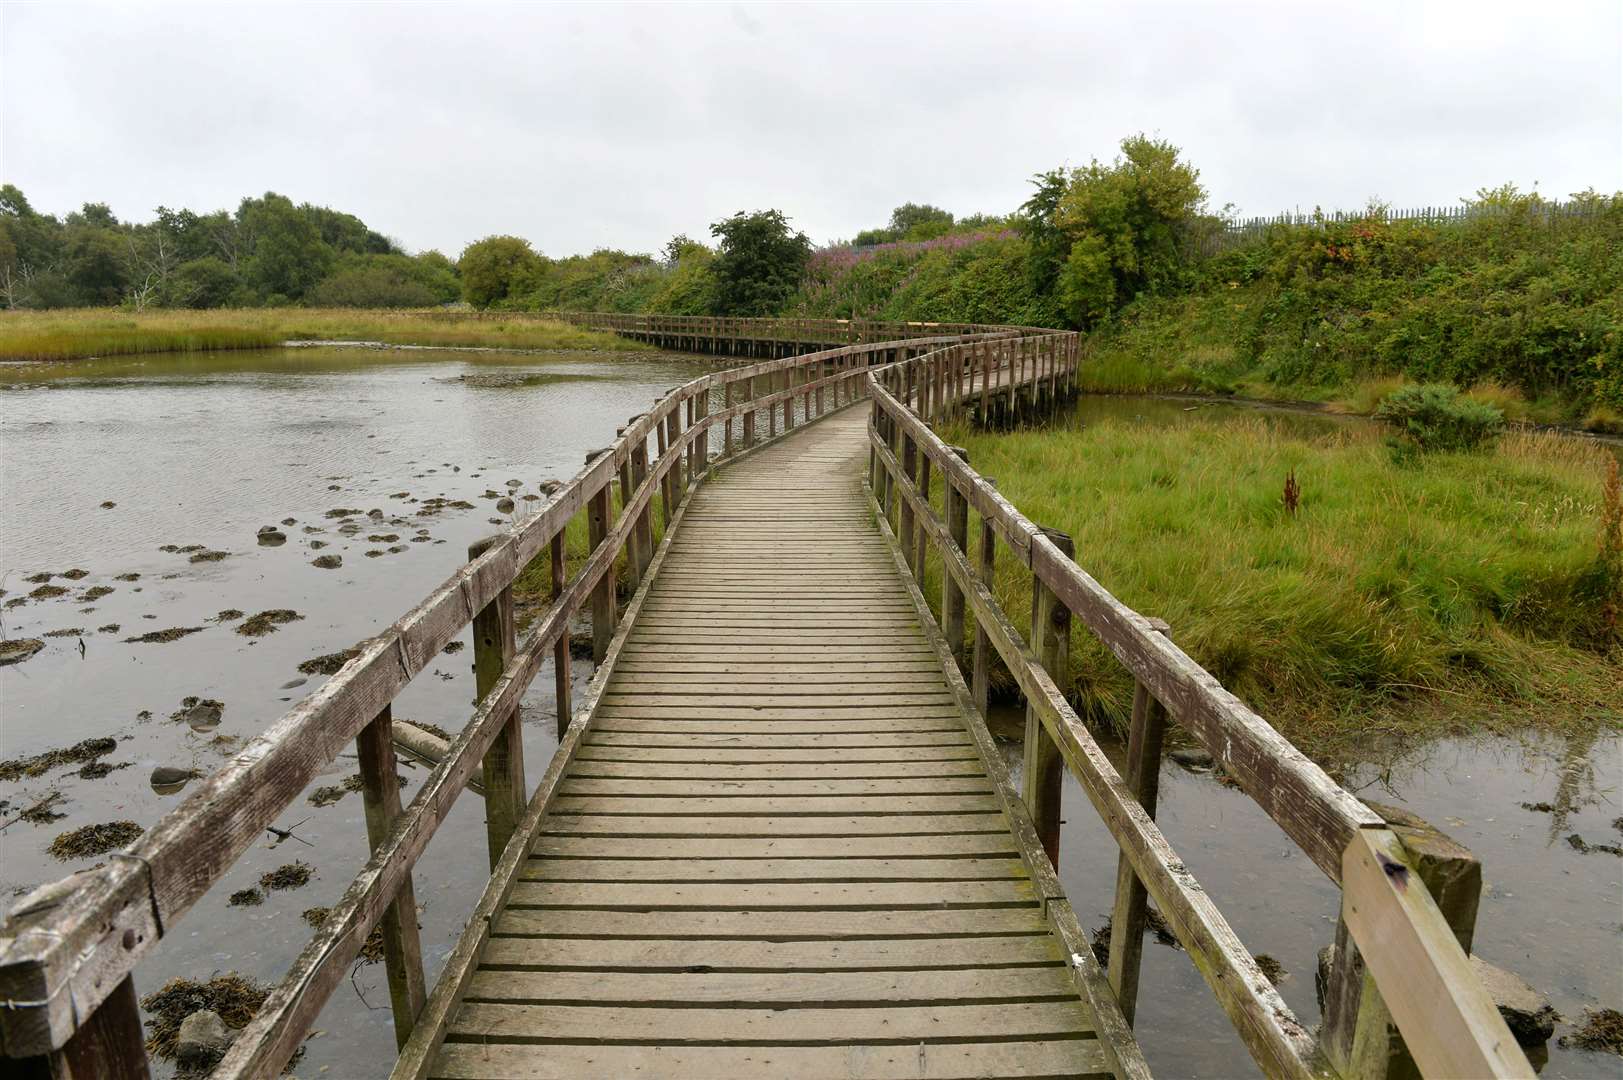 The boardwalk at Merkinch Local Nature Reserve has been closed.